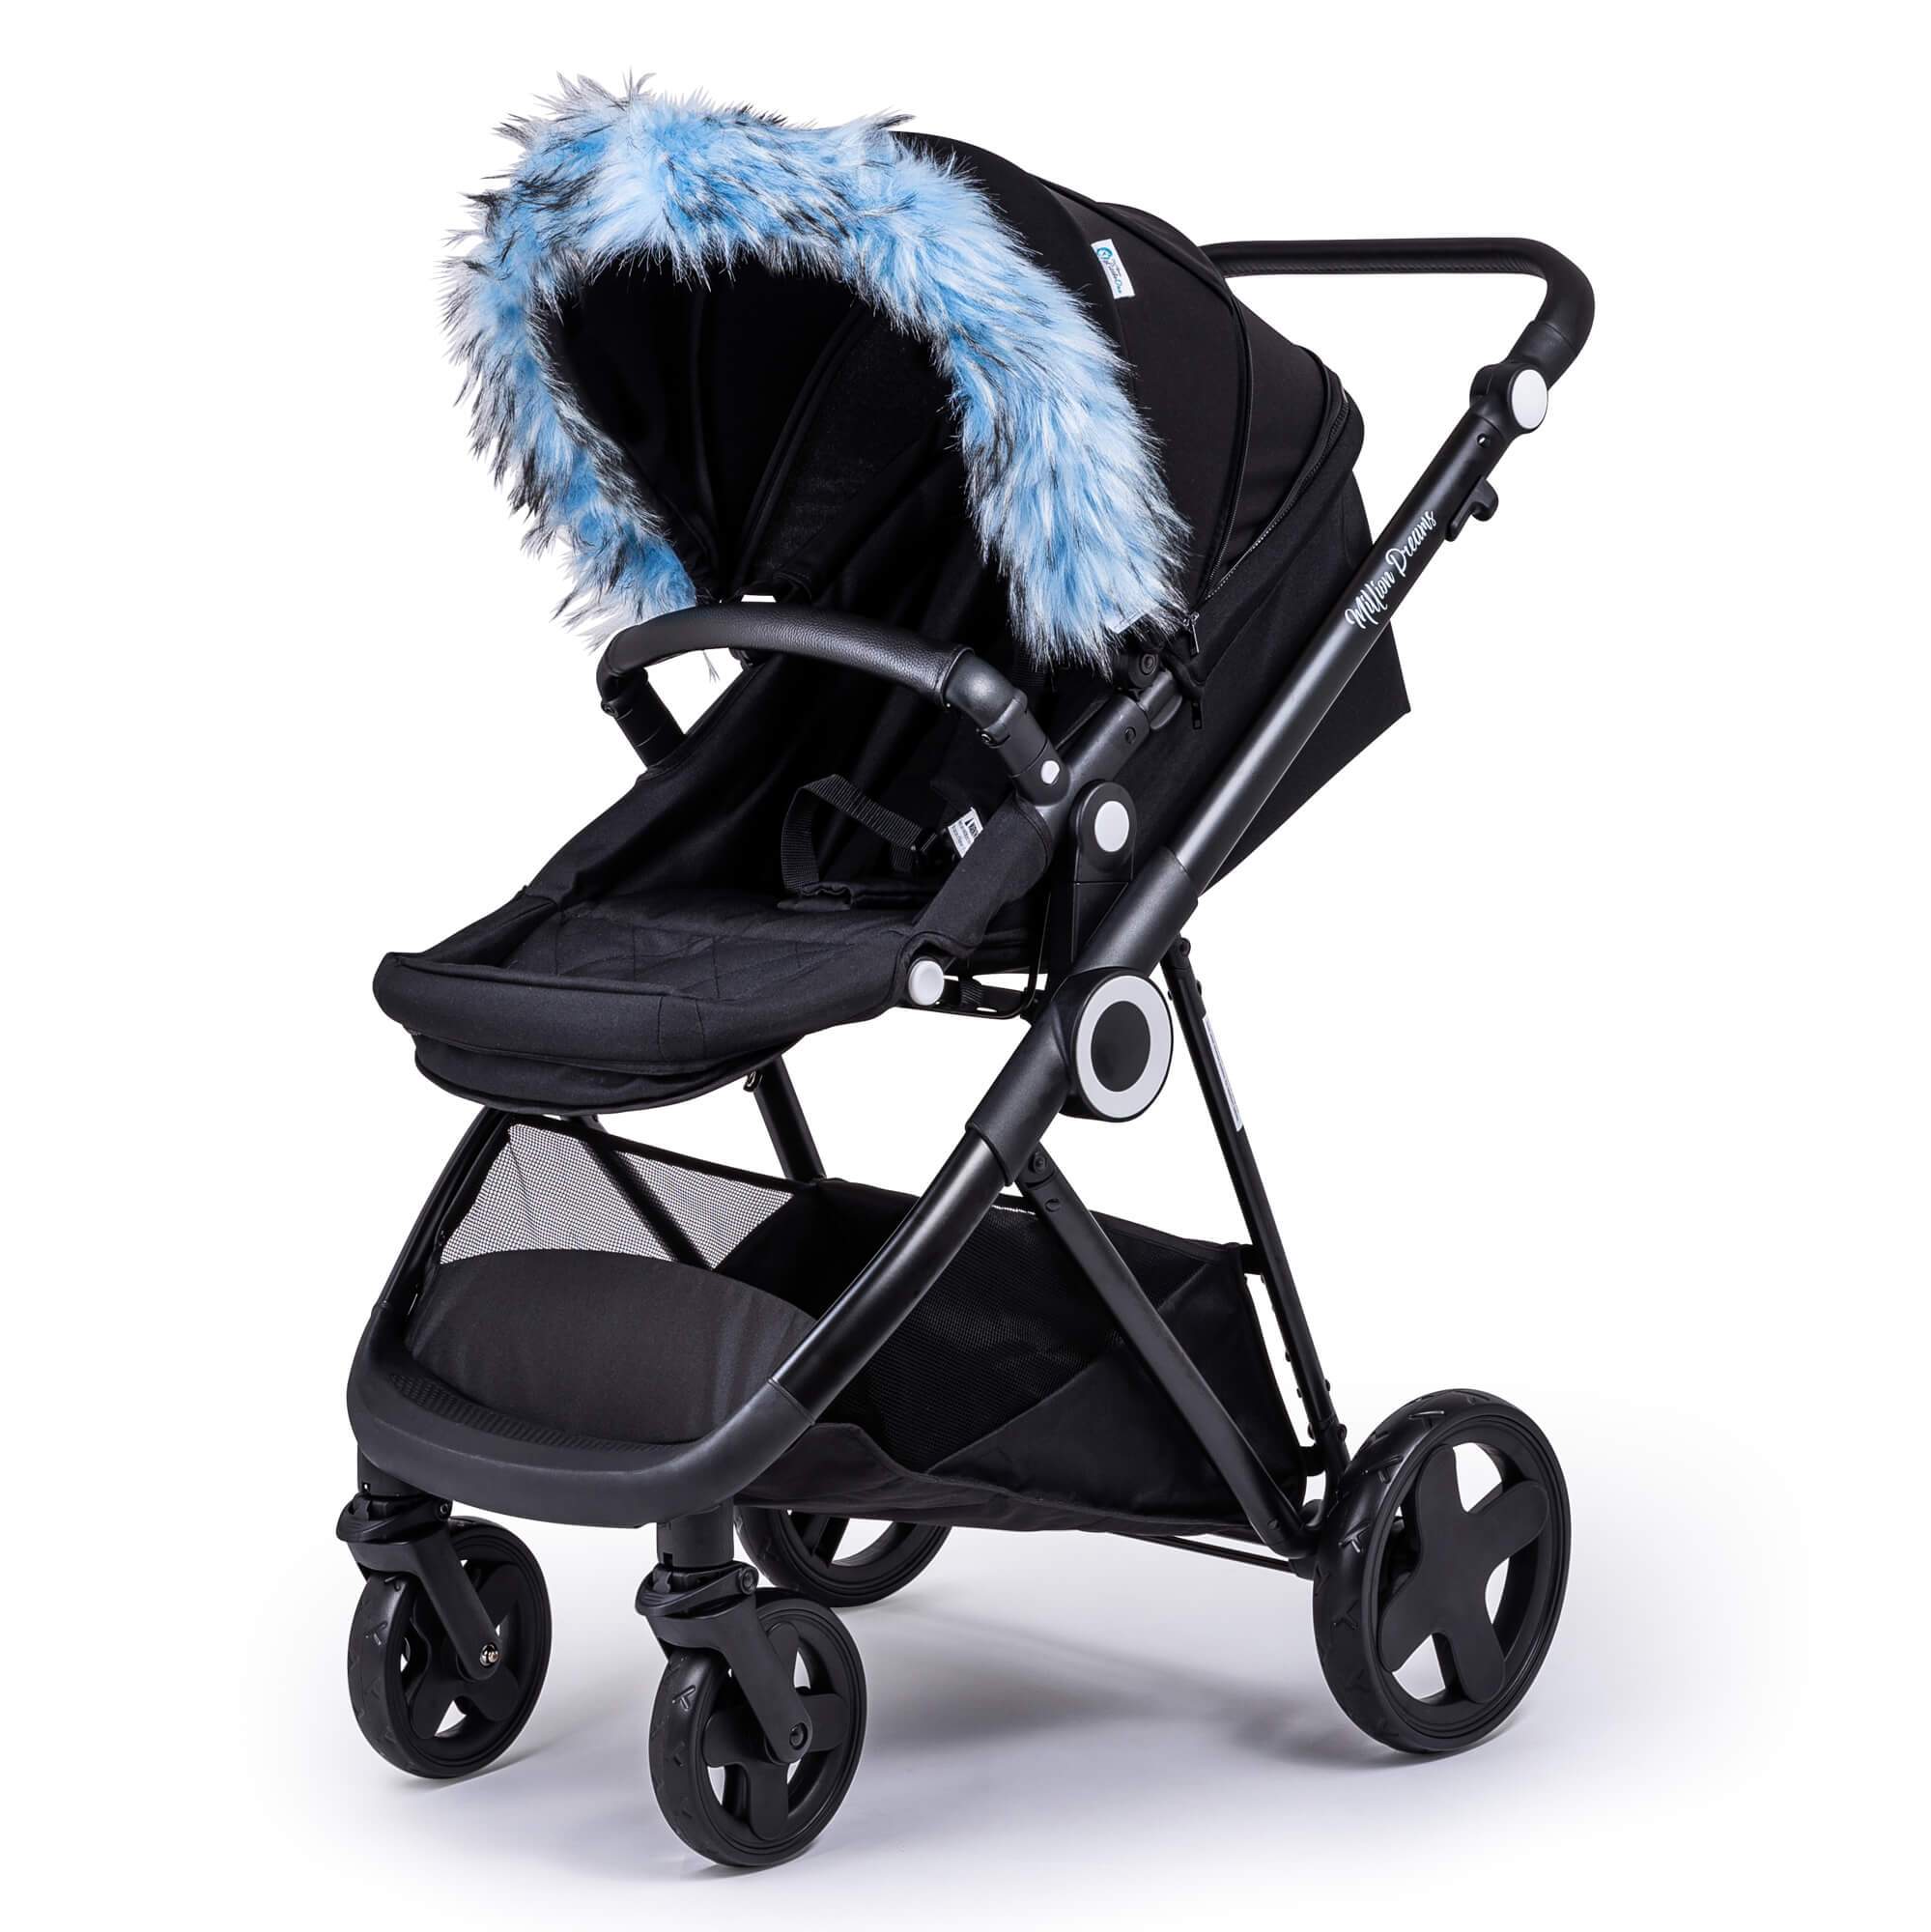 Pram Fur Hood Trim Attachment for Pushchair Compatible with BabyDan - Light Blue / Fits All Models | For Your Little One